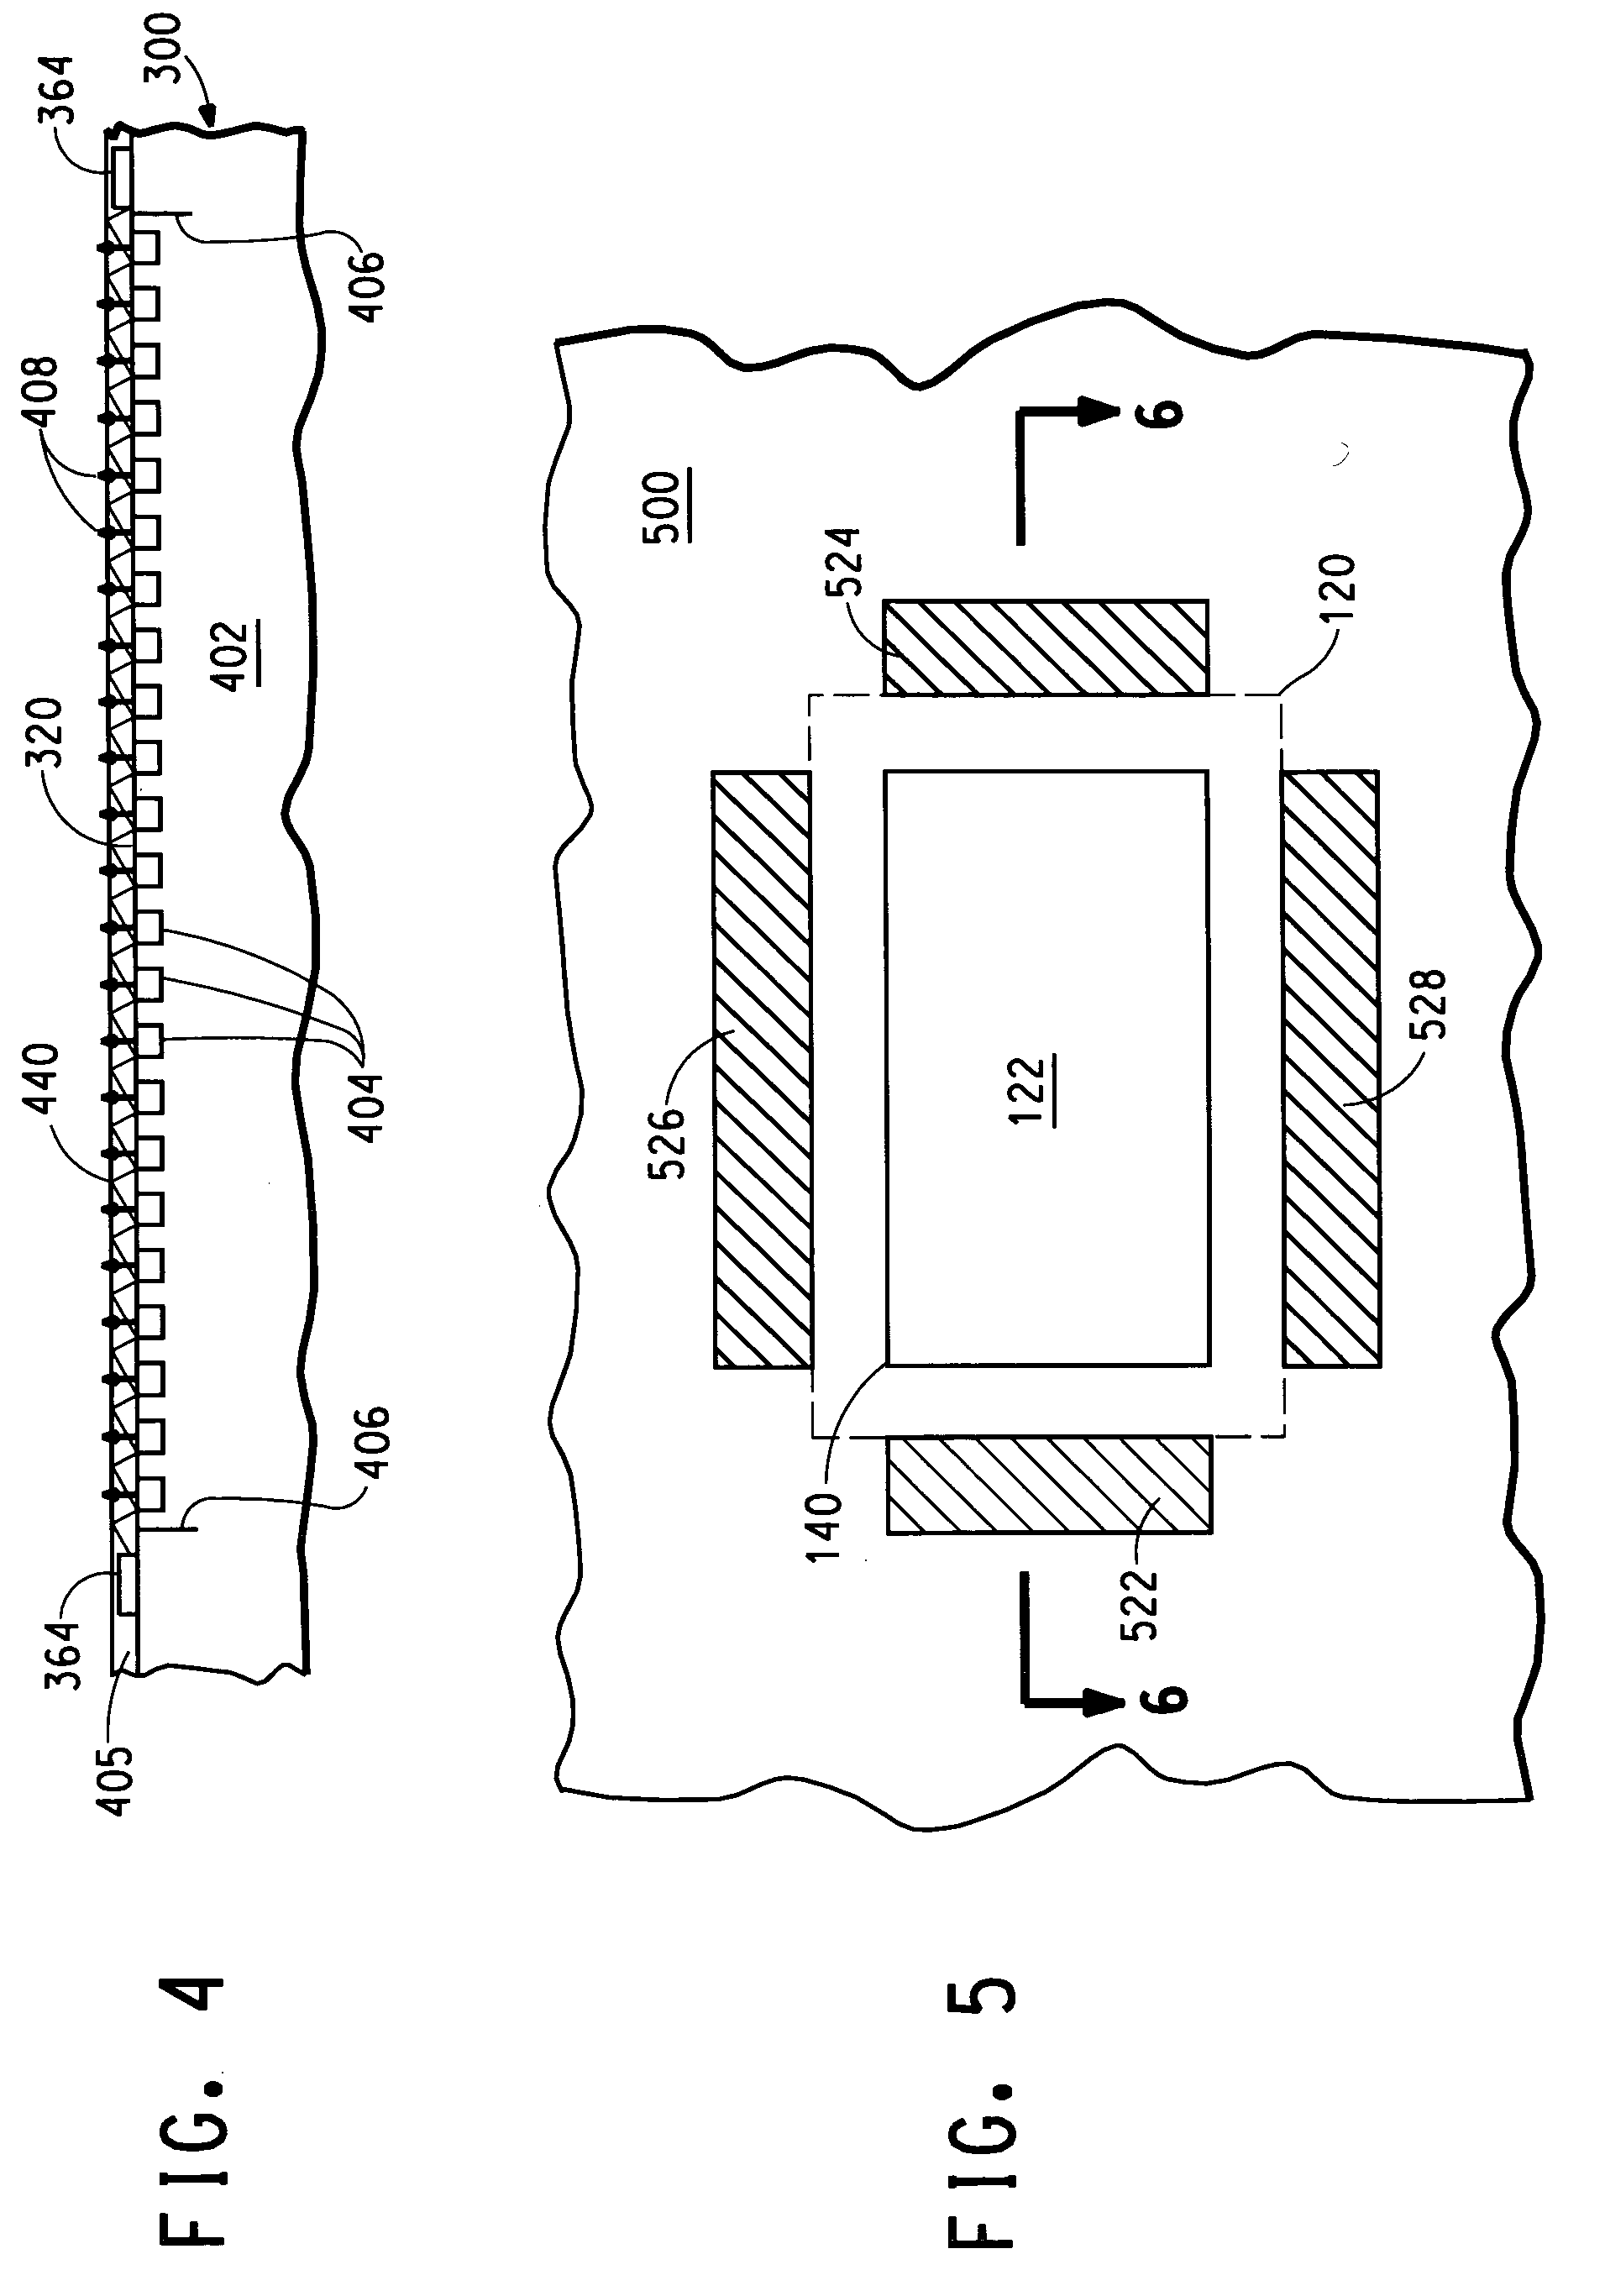 Electronic device and method of using the same